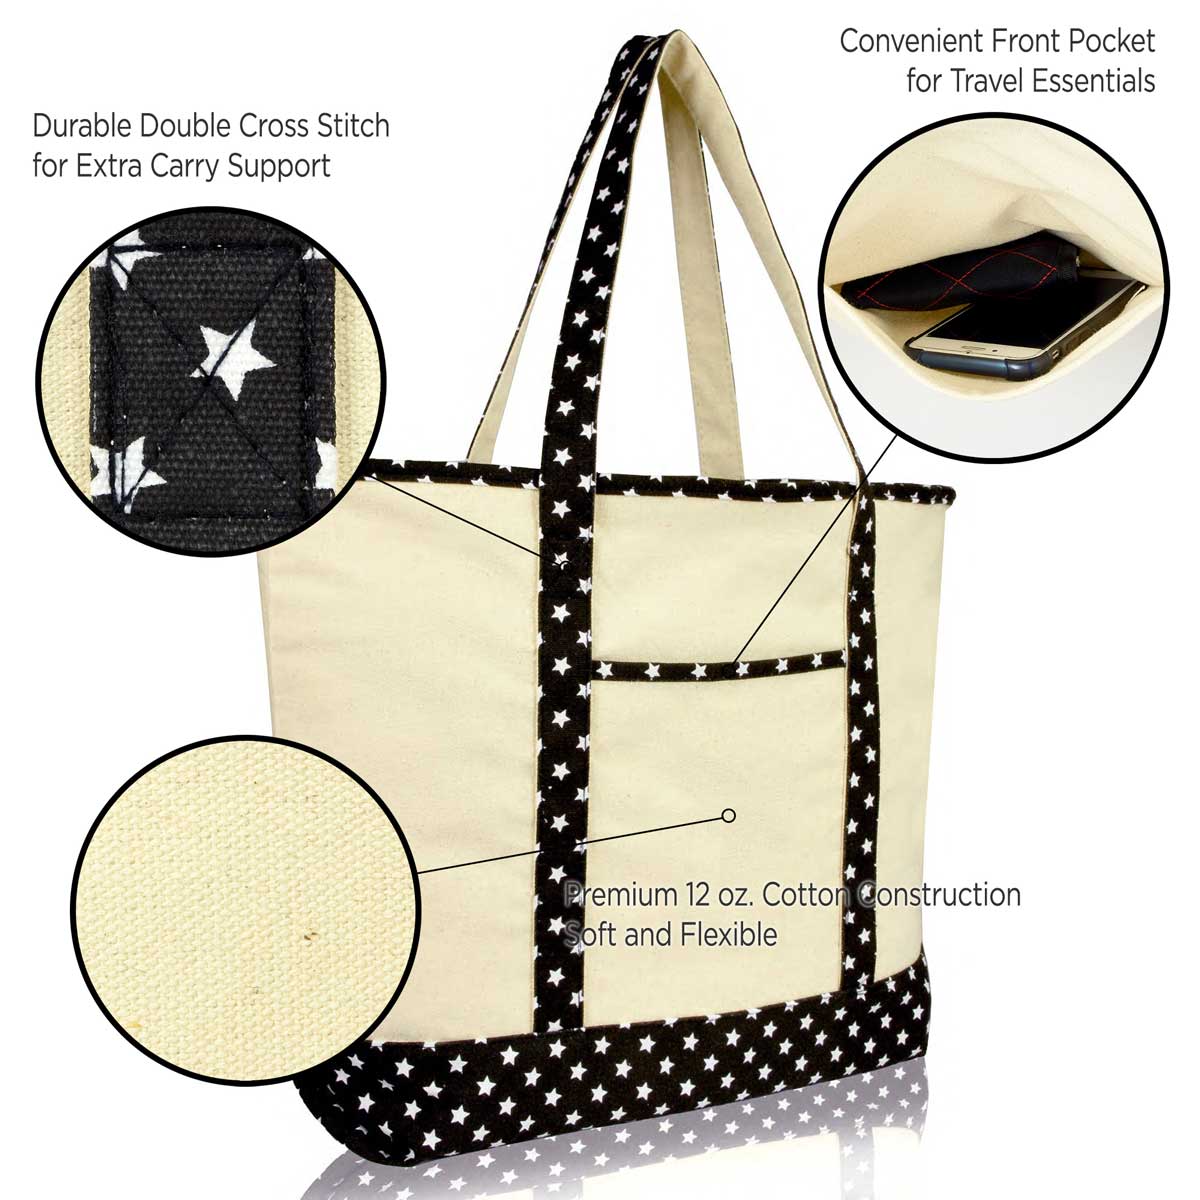 Dalix 22" Soft Canvas Tote Bag Special Patterns Collection